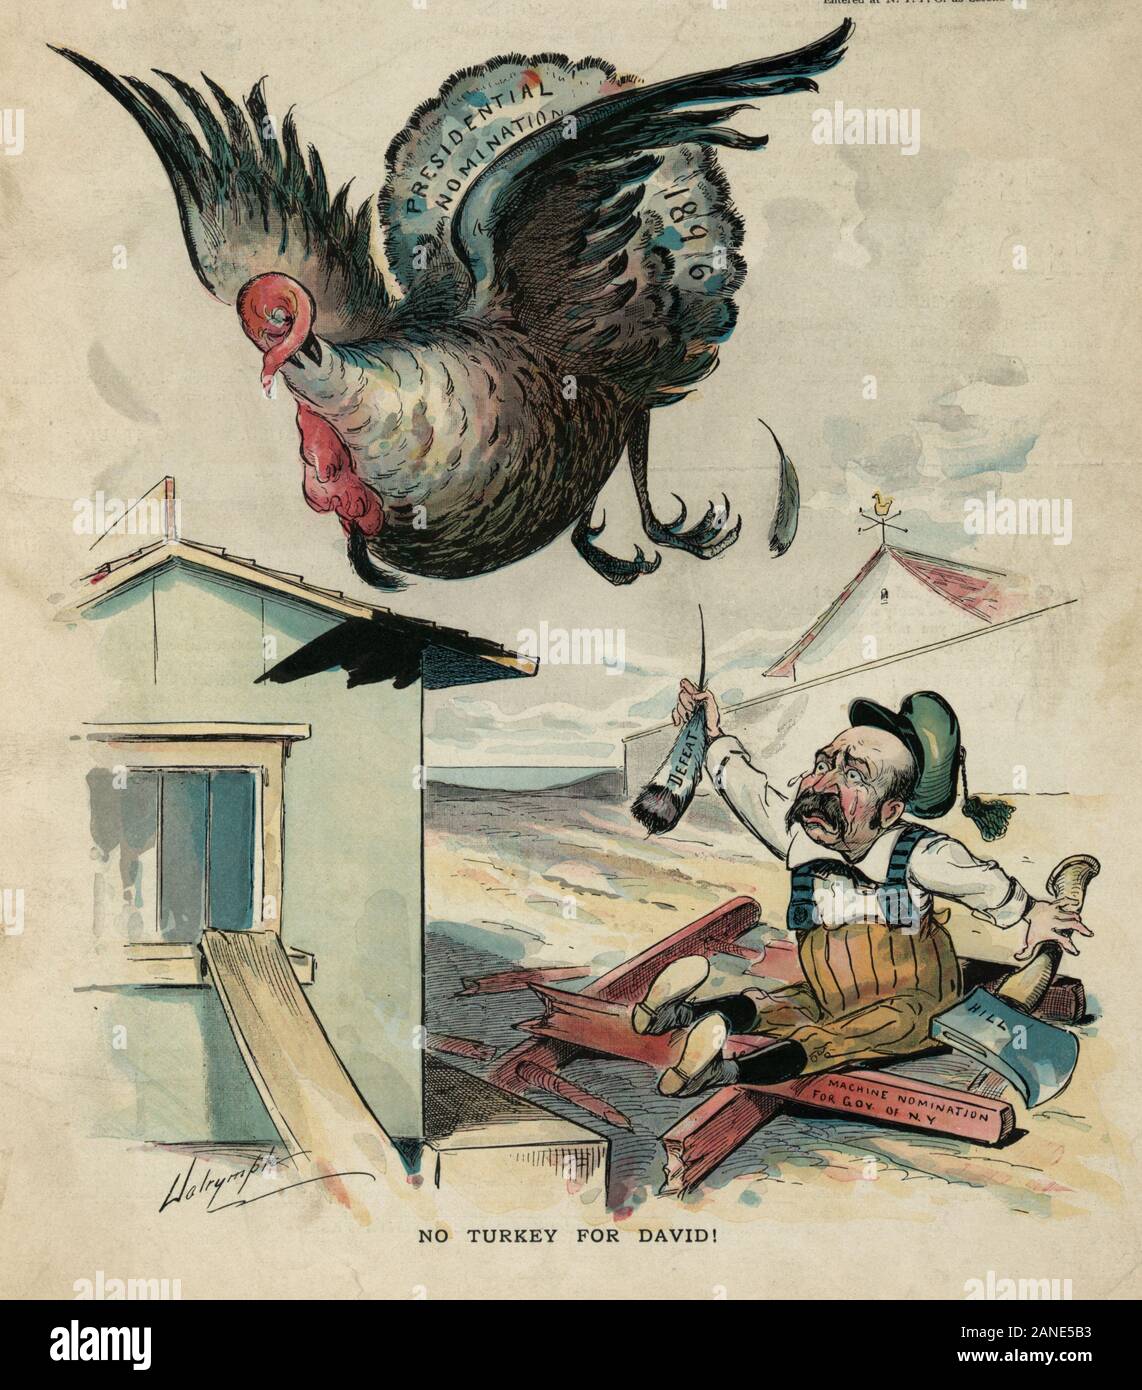 No turkey for David! Print shows a distraught David B. Hill sitting on the ground on a broken ladder labeled 'Machine Nomination for Governor of N.Y.', holding a hatchet labeled 'Hill' in his left hand and a turkey feather labeled 'Defeat' in his right hand; the turkey, labeled 'Presidential Nomination 1896', is flying away. Political Cartoon, November, 1894 Stock Photo